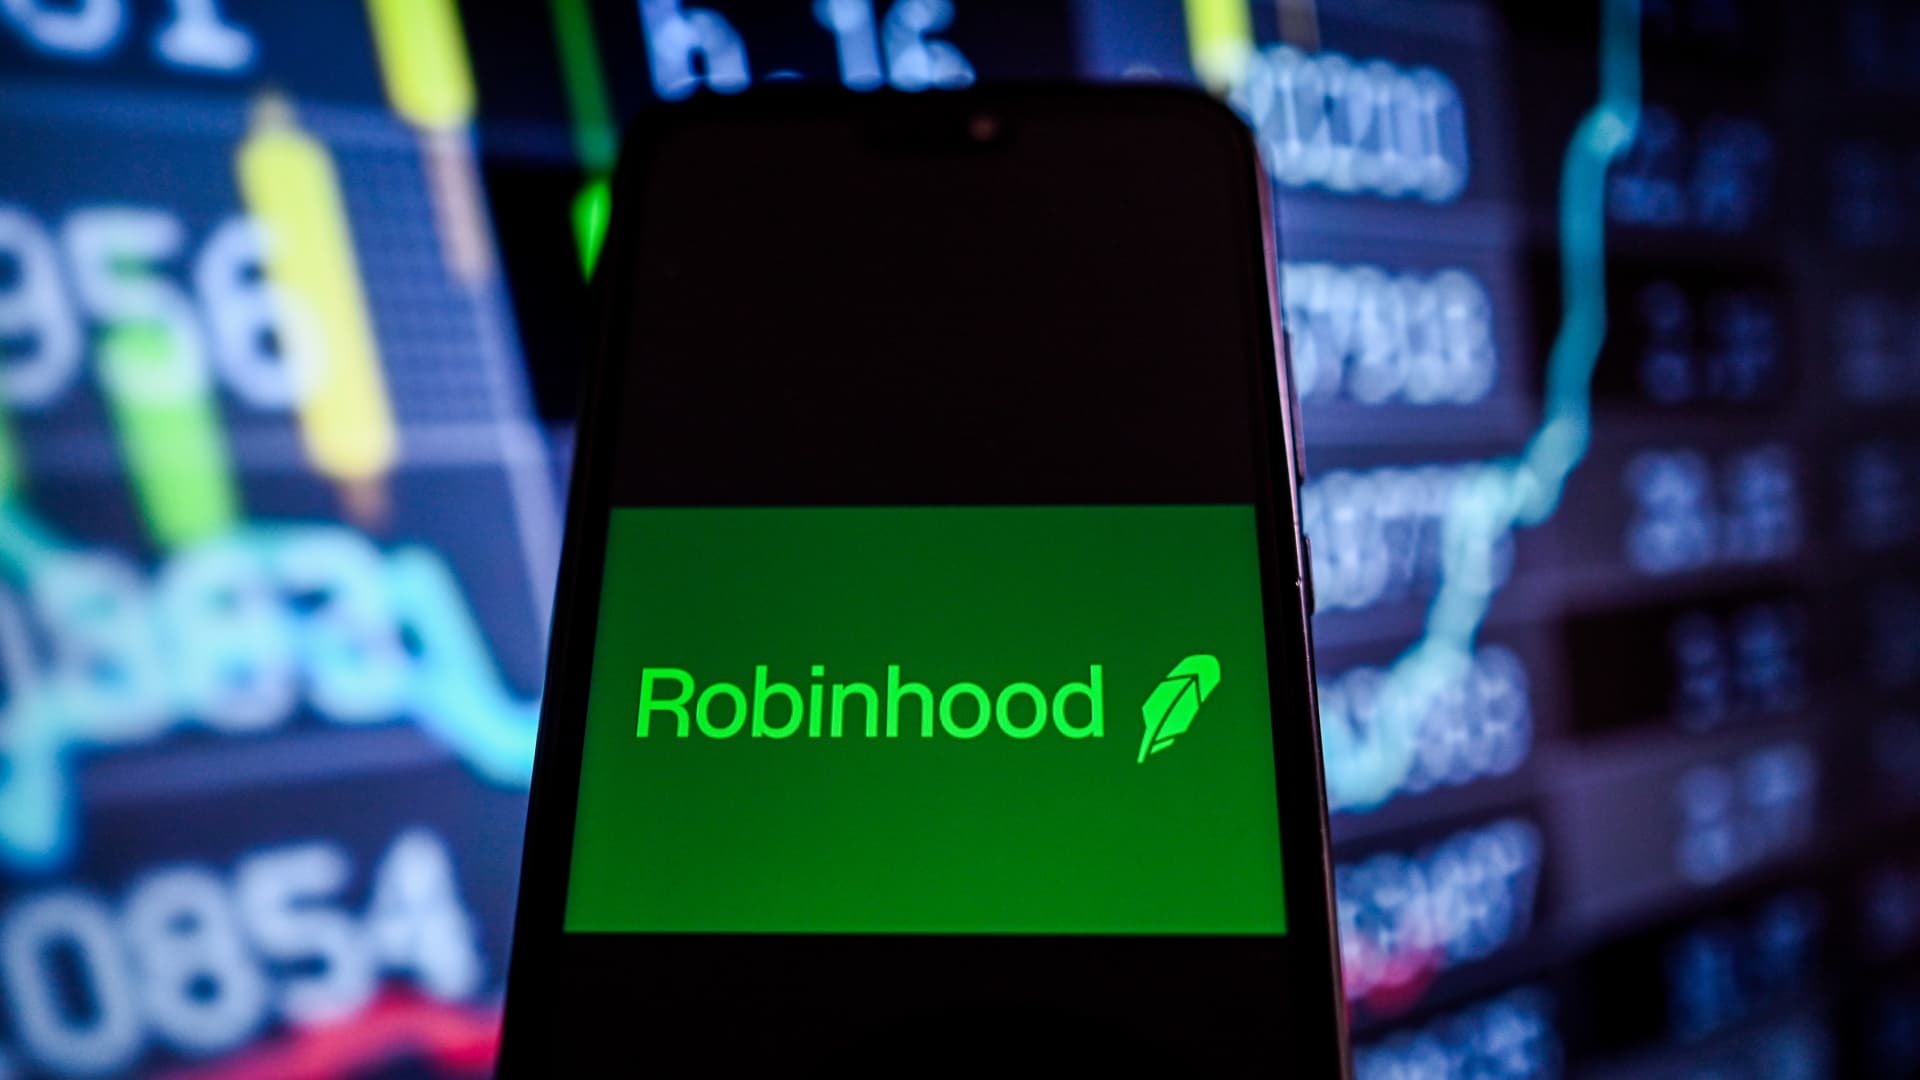 Robinhood says SEC could pursue enforcement actions over crypto operations